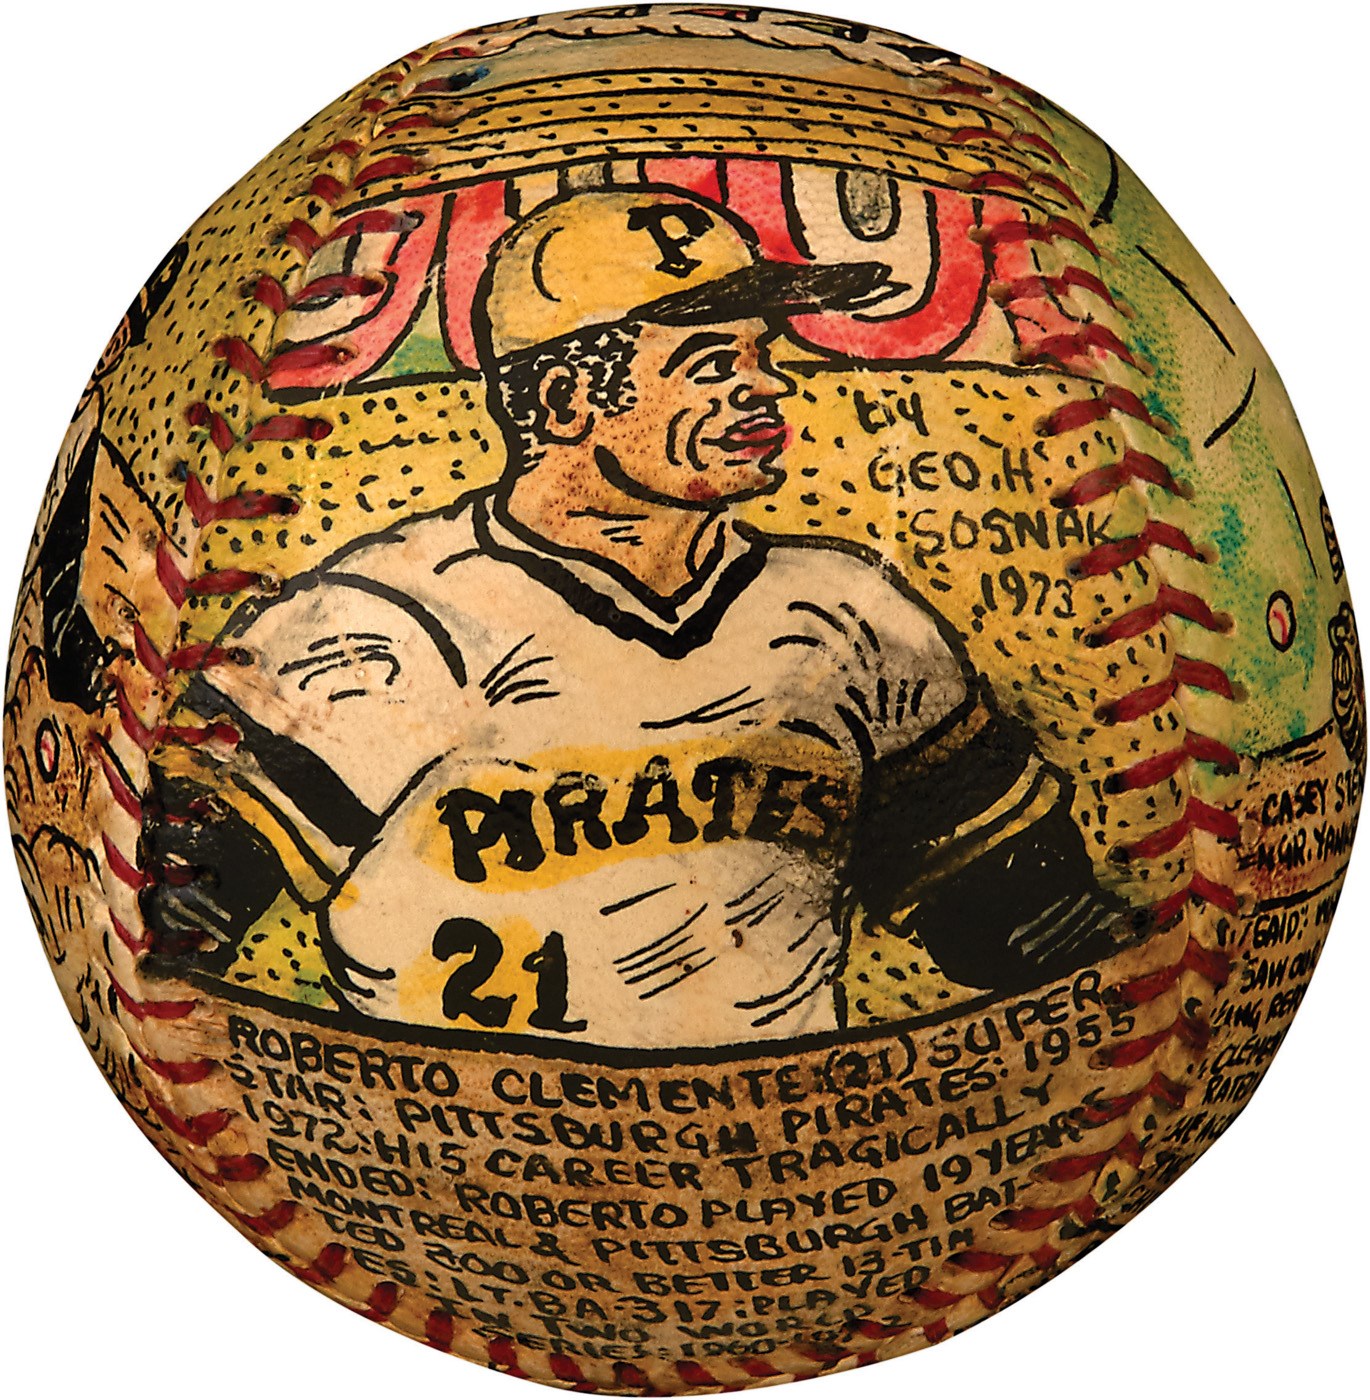 Clemente and Pittsburgh Pirates - Exceptional 1973 "Roberto Clemente Super Star" Painted Baseball by George Sosnak